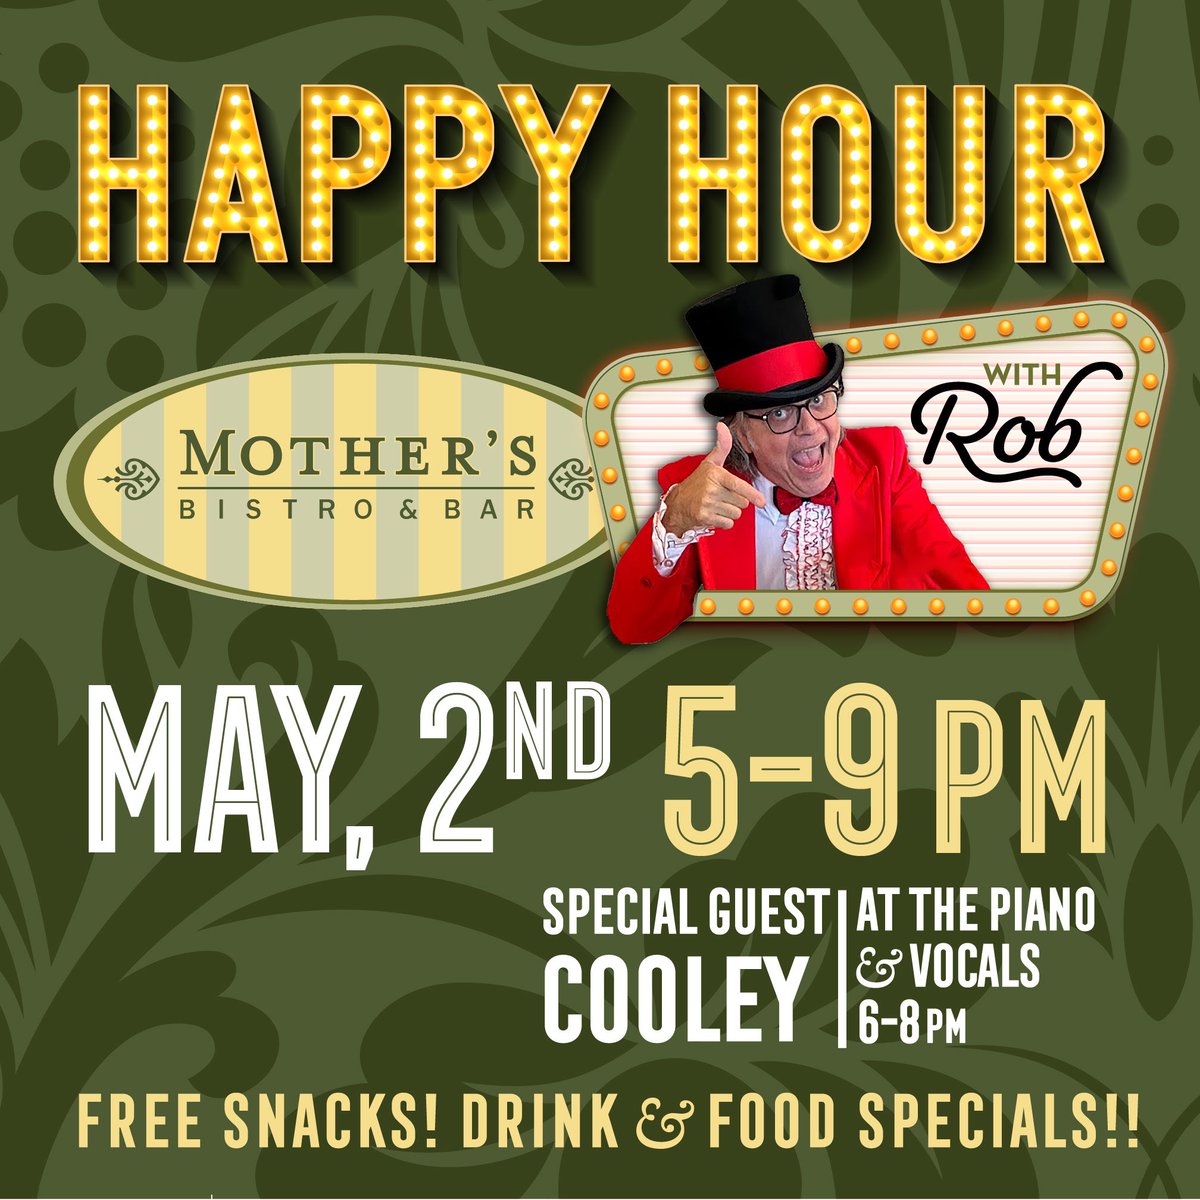 Self promotion Thursdays! If you're in Portland, drop by this evening for a cocktail and some nosh. #PDX #HappyHour #MothersBistro